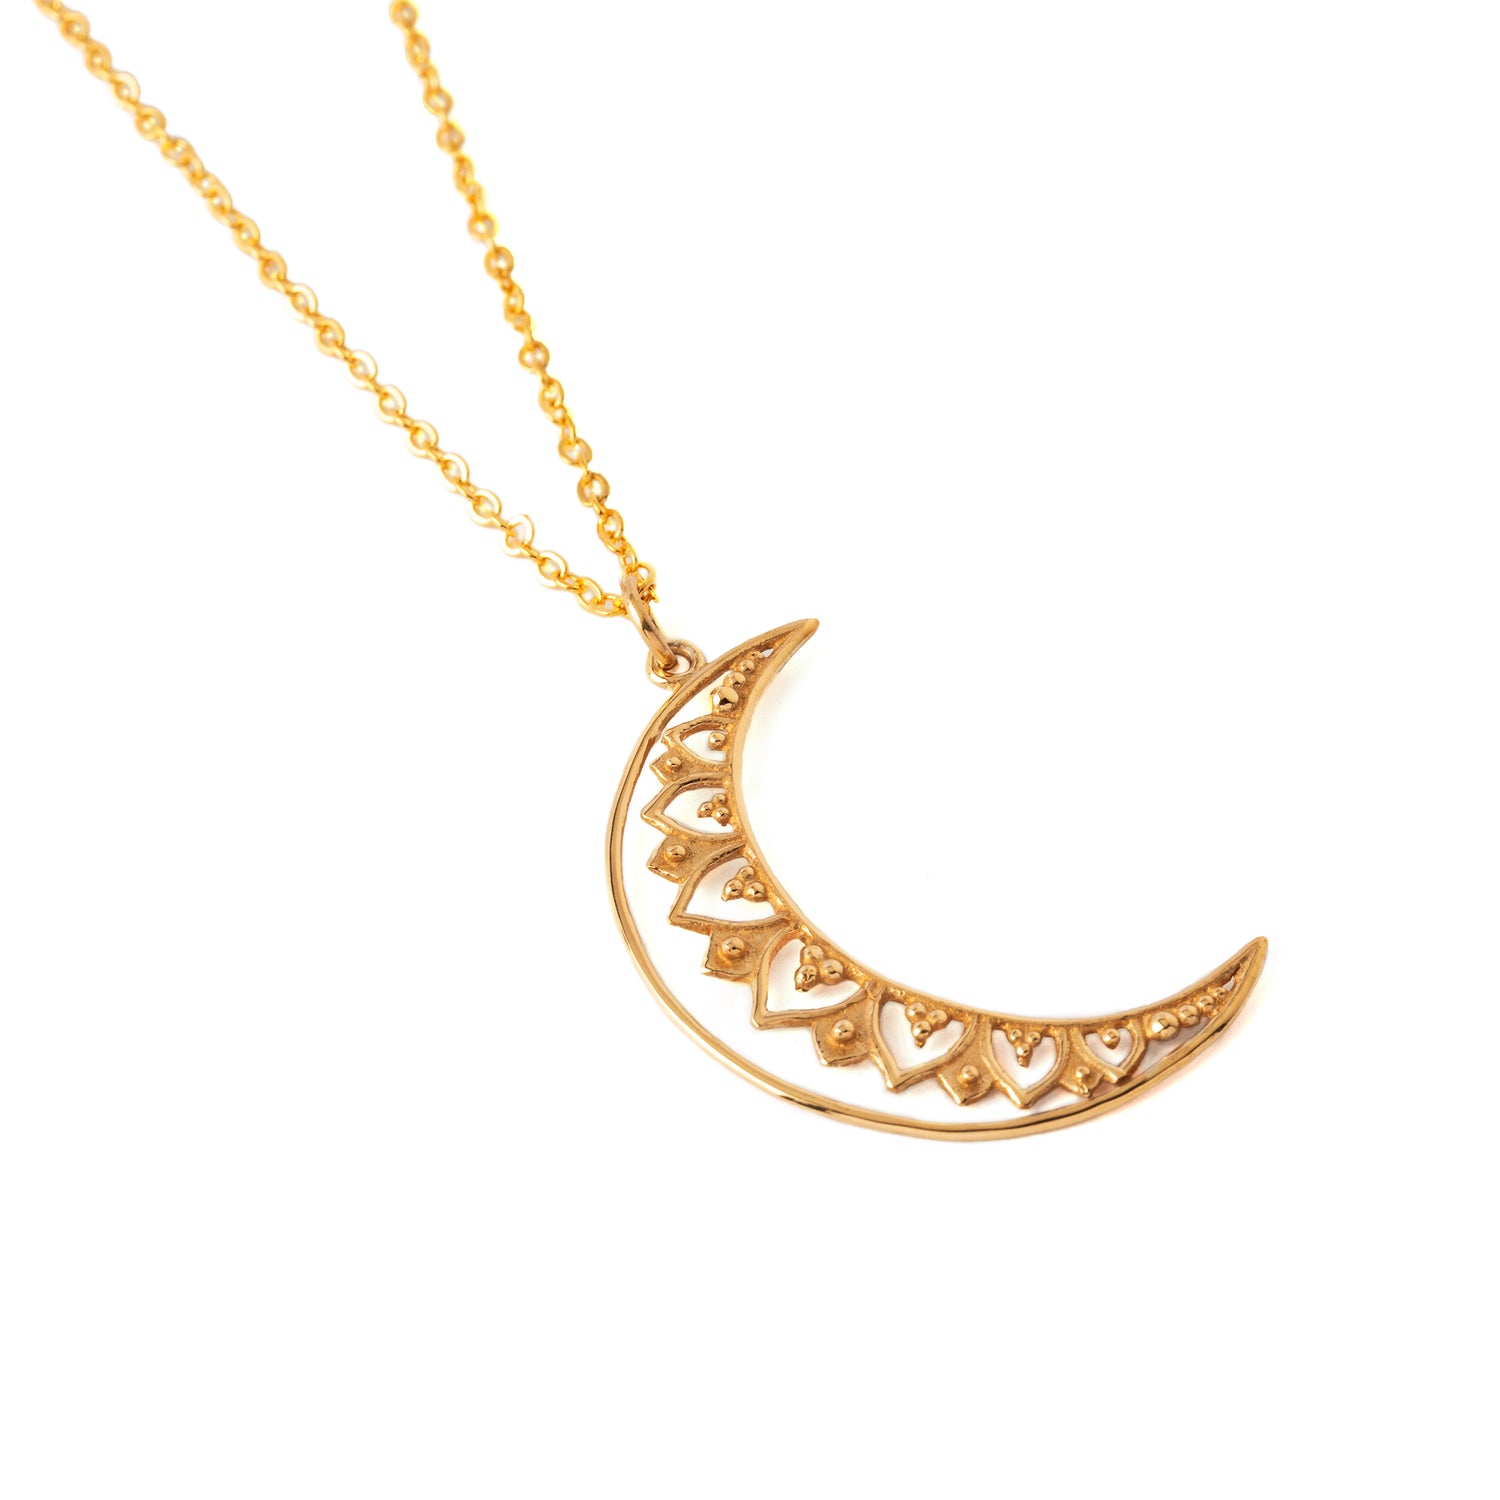 Vinyasa Moon Necklace right side view